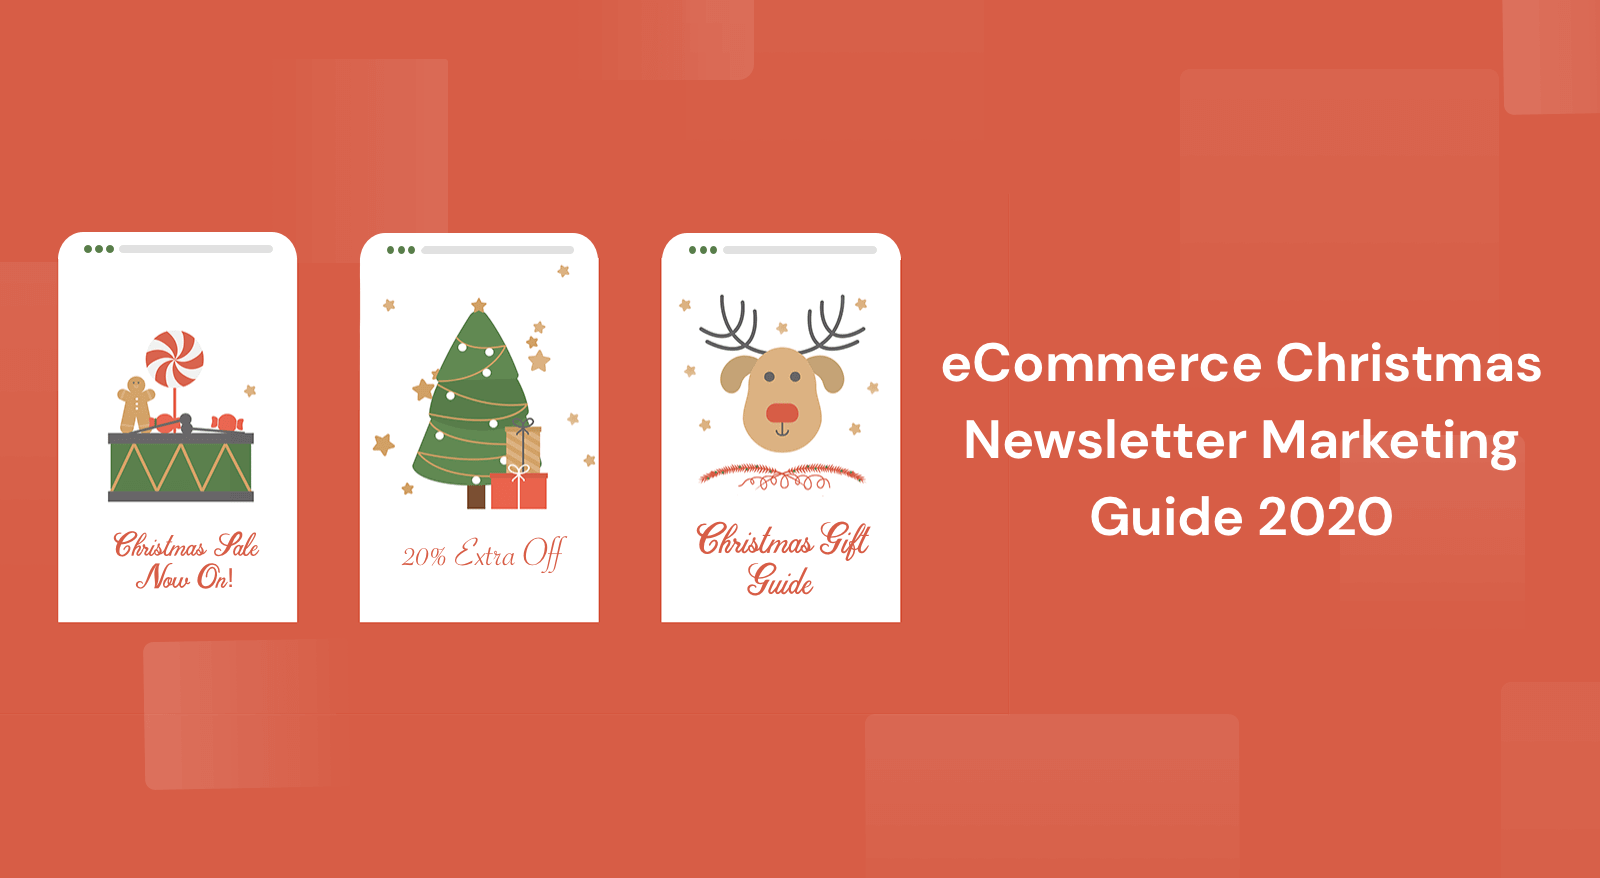 eCommerce Christmas Campaign: Newsletter Marketing Guide